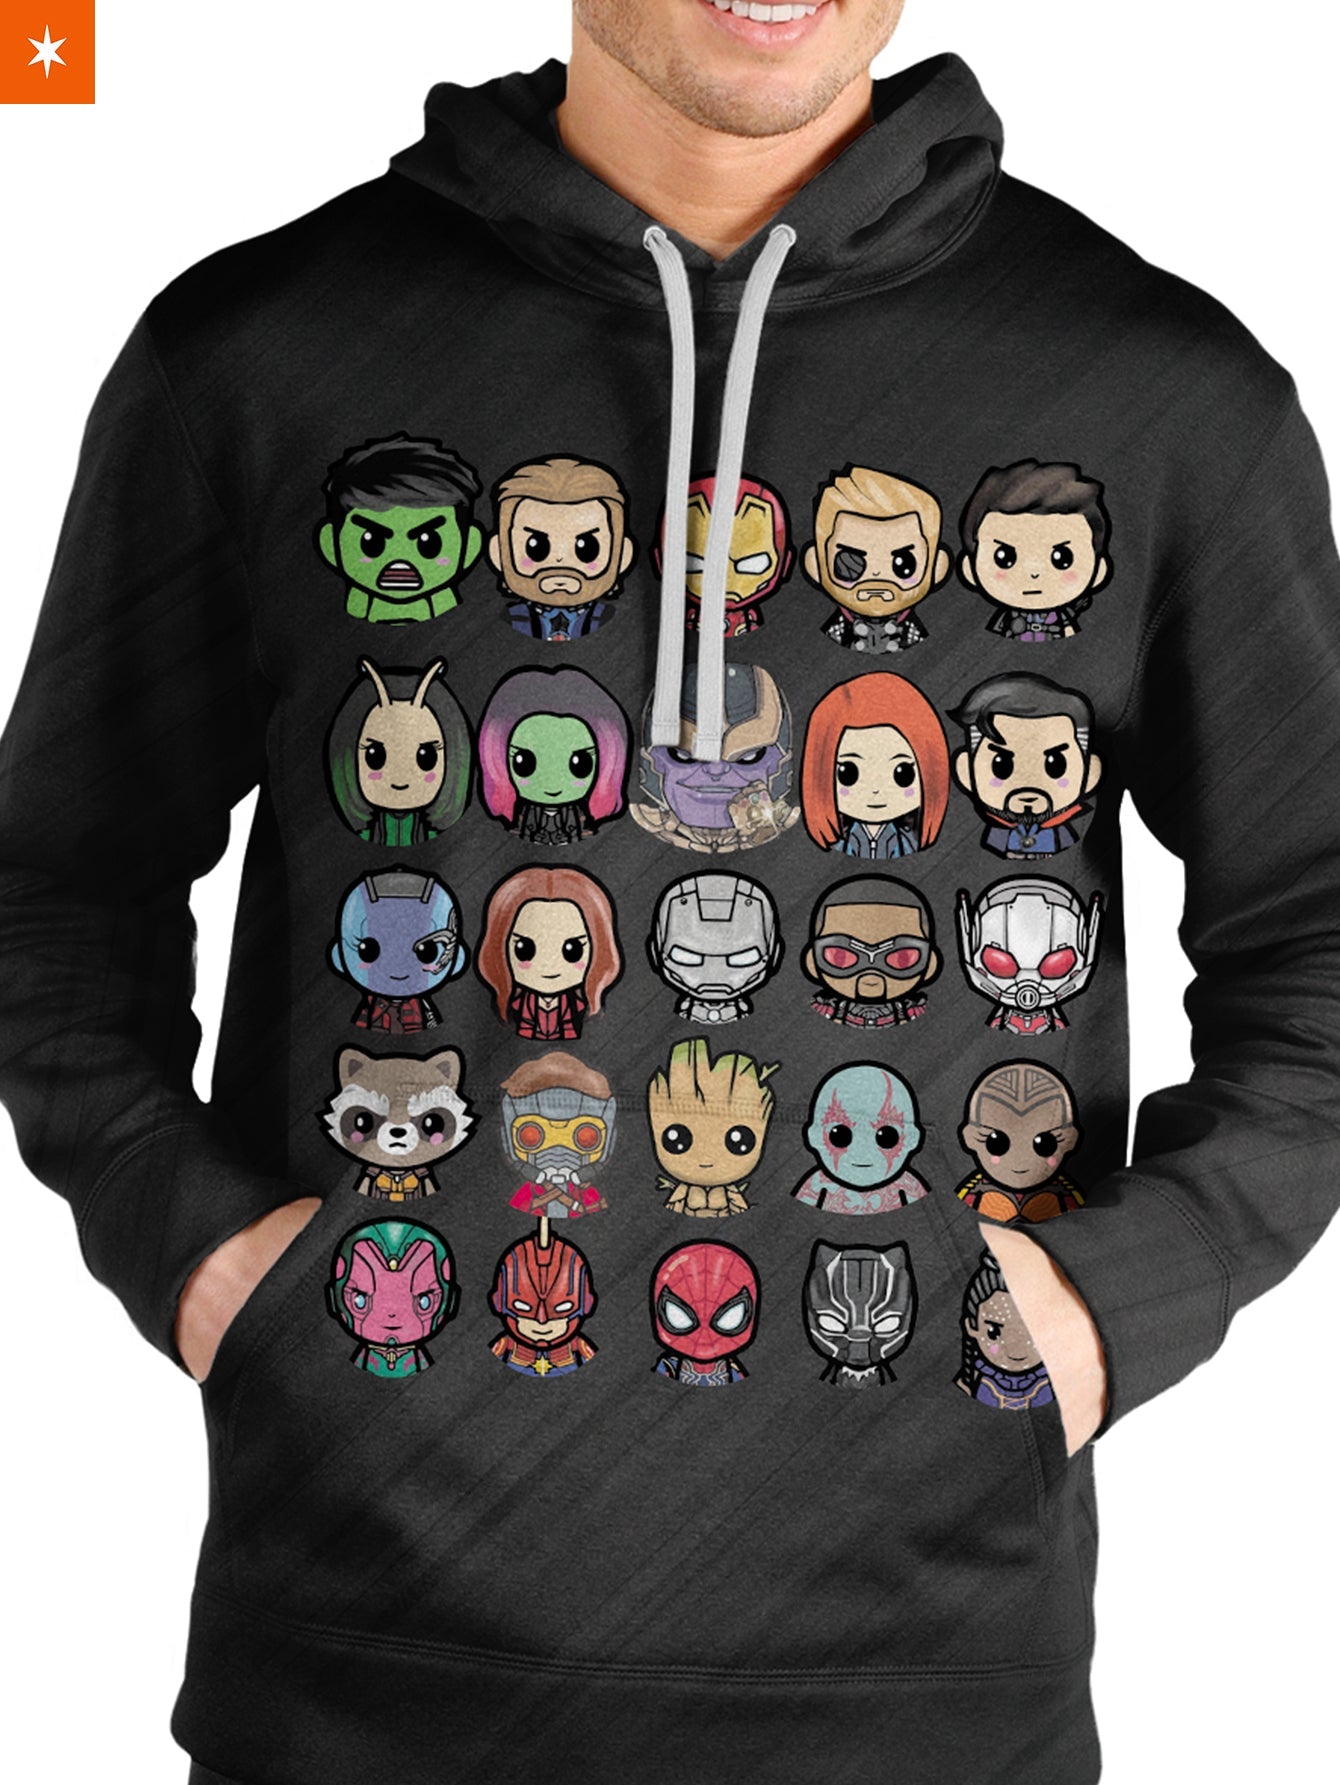 Fandomaniax - Whatever It Takes Unisex Pullover Hoodie